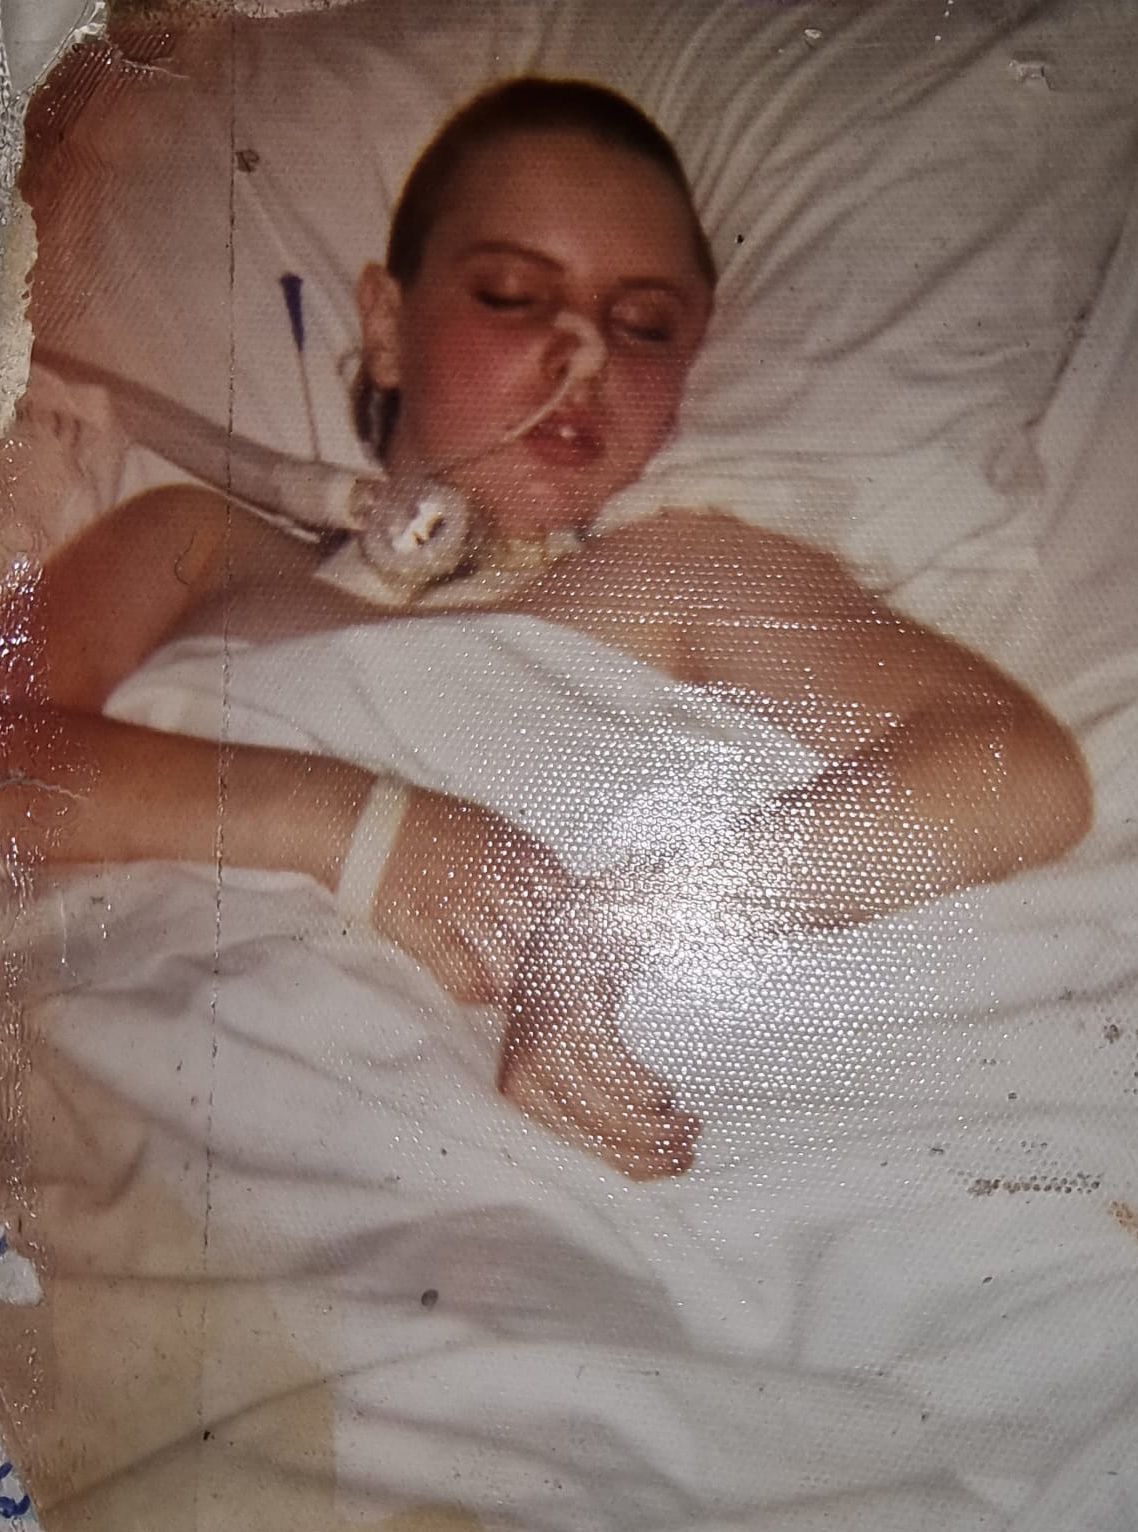 FIGHTING FOR LIFE: Carol Toner unconscious in hospital after being beaten by the British Army